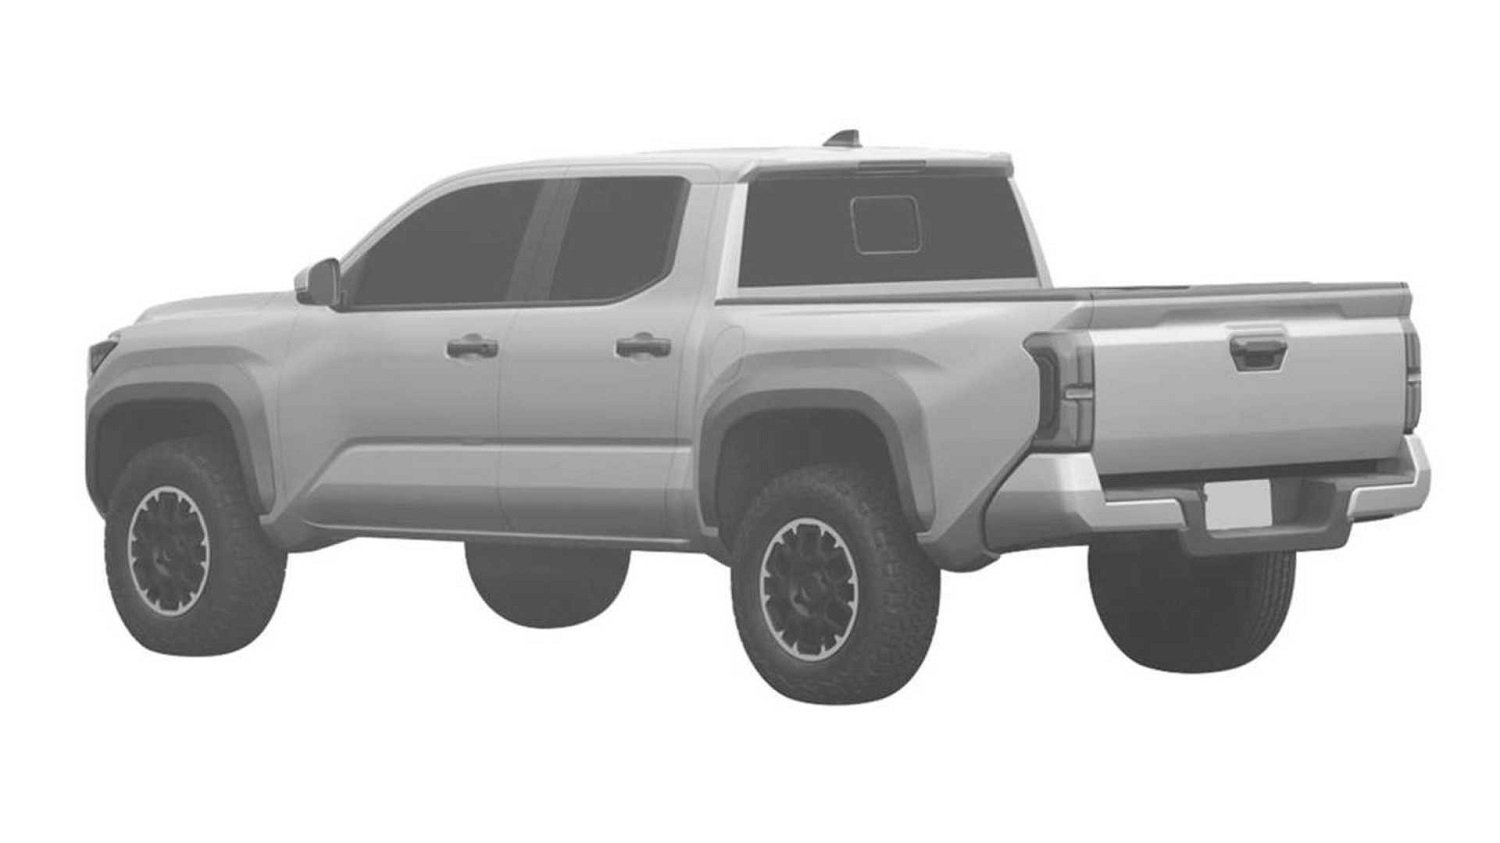 New generation Toyota Tacoma patents uncovered